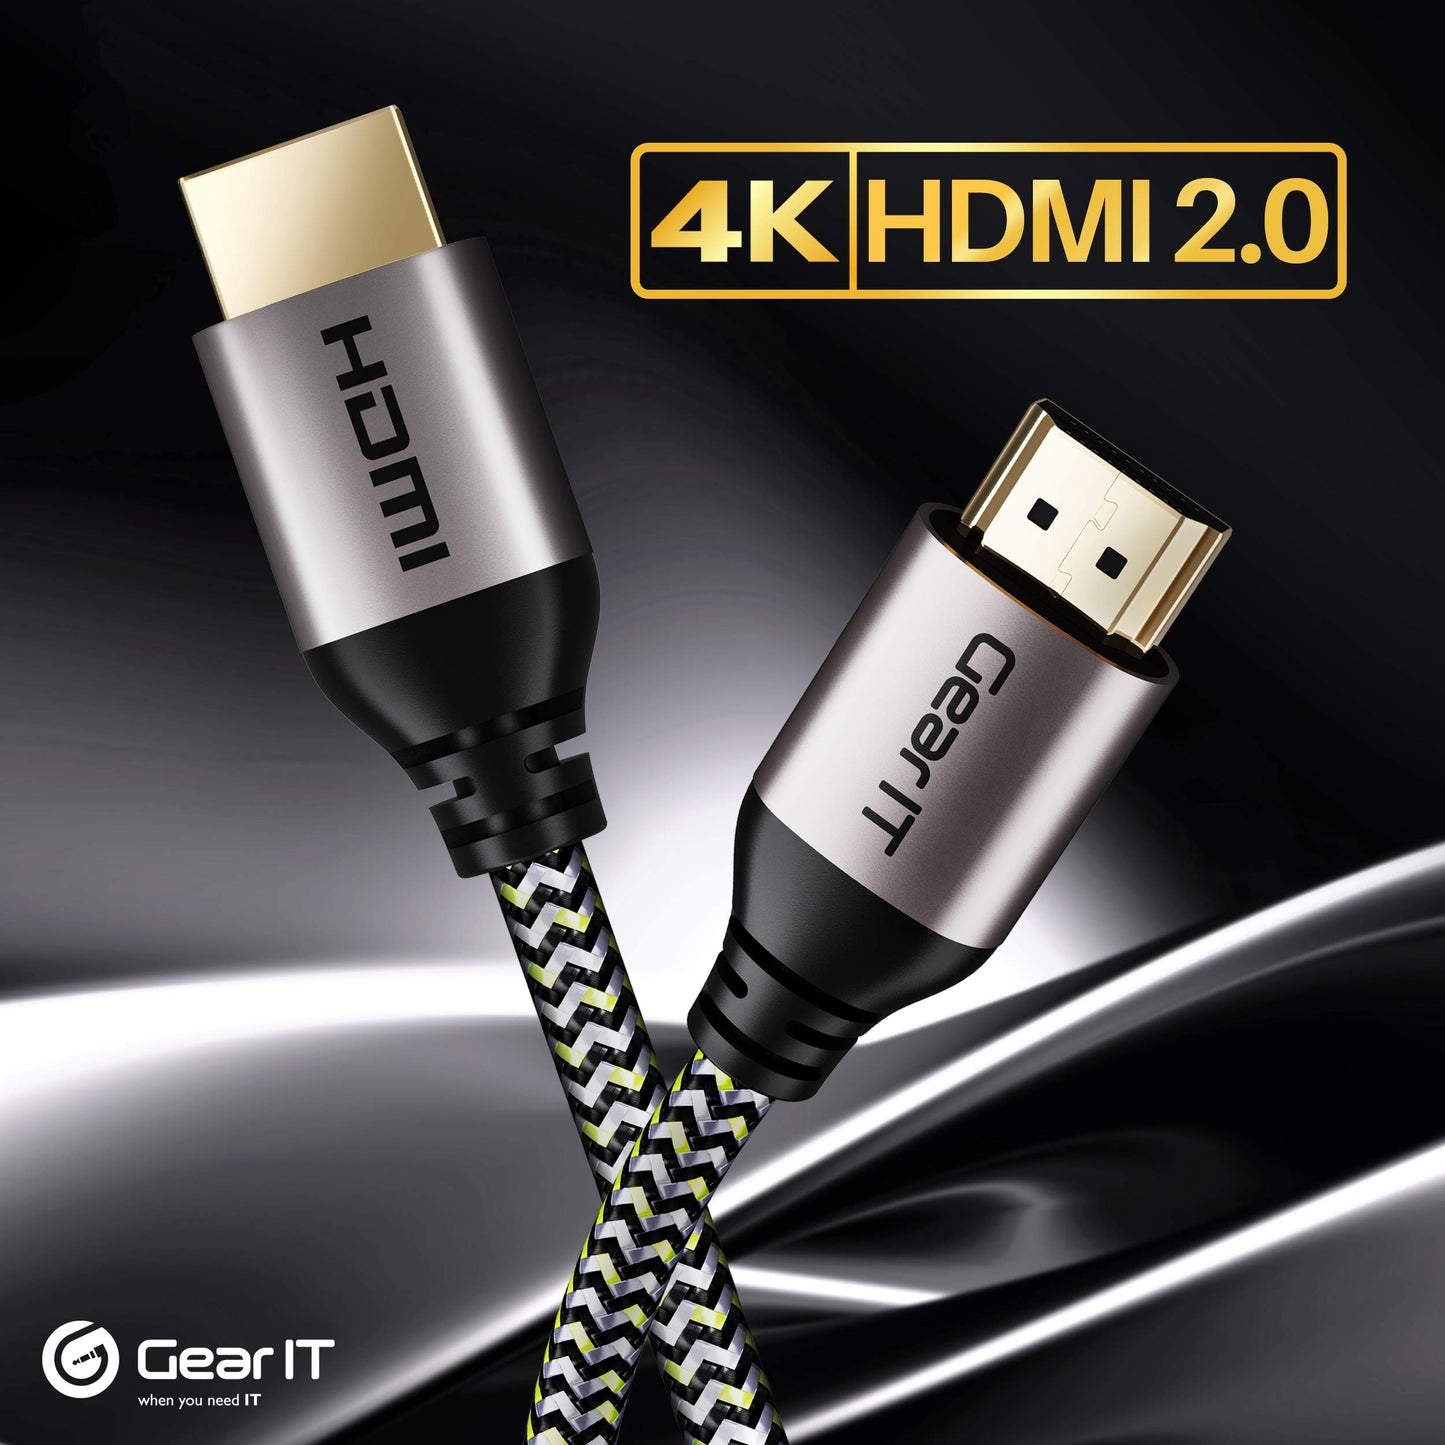 GearIT HDMI Cable (10-Pack / 16.4ft / 5m) High-Speed HDMI 2.0b, 4K 60hz, 3D, ARC, HDCP 2.2, HDR, 18Gbps - Nylon Braided Cord